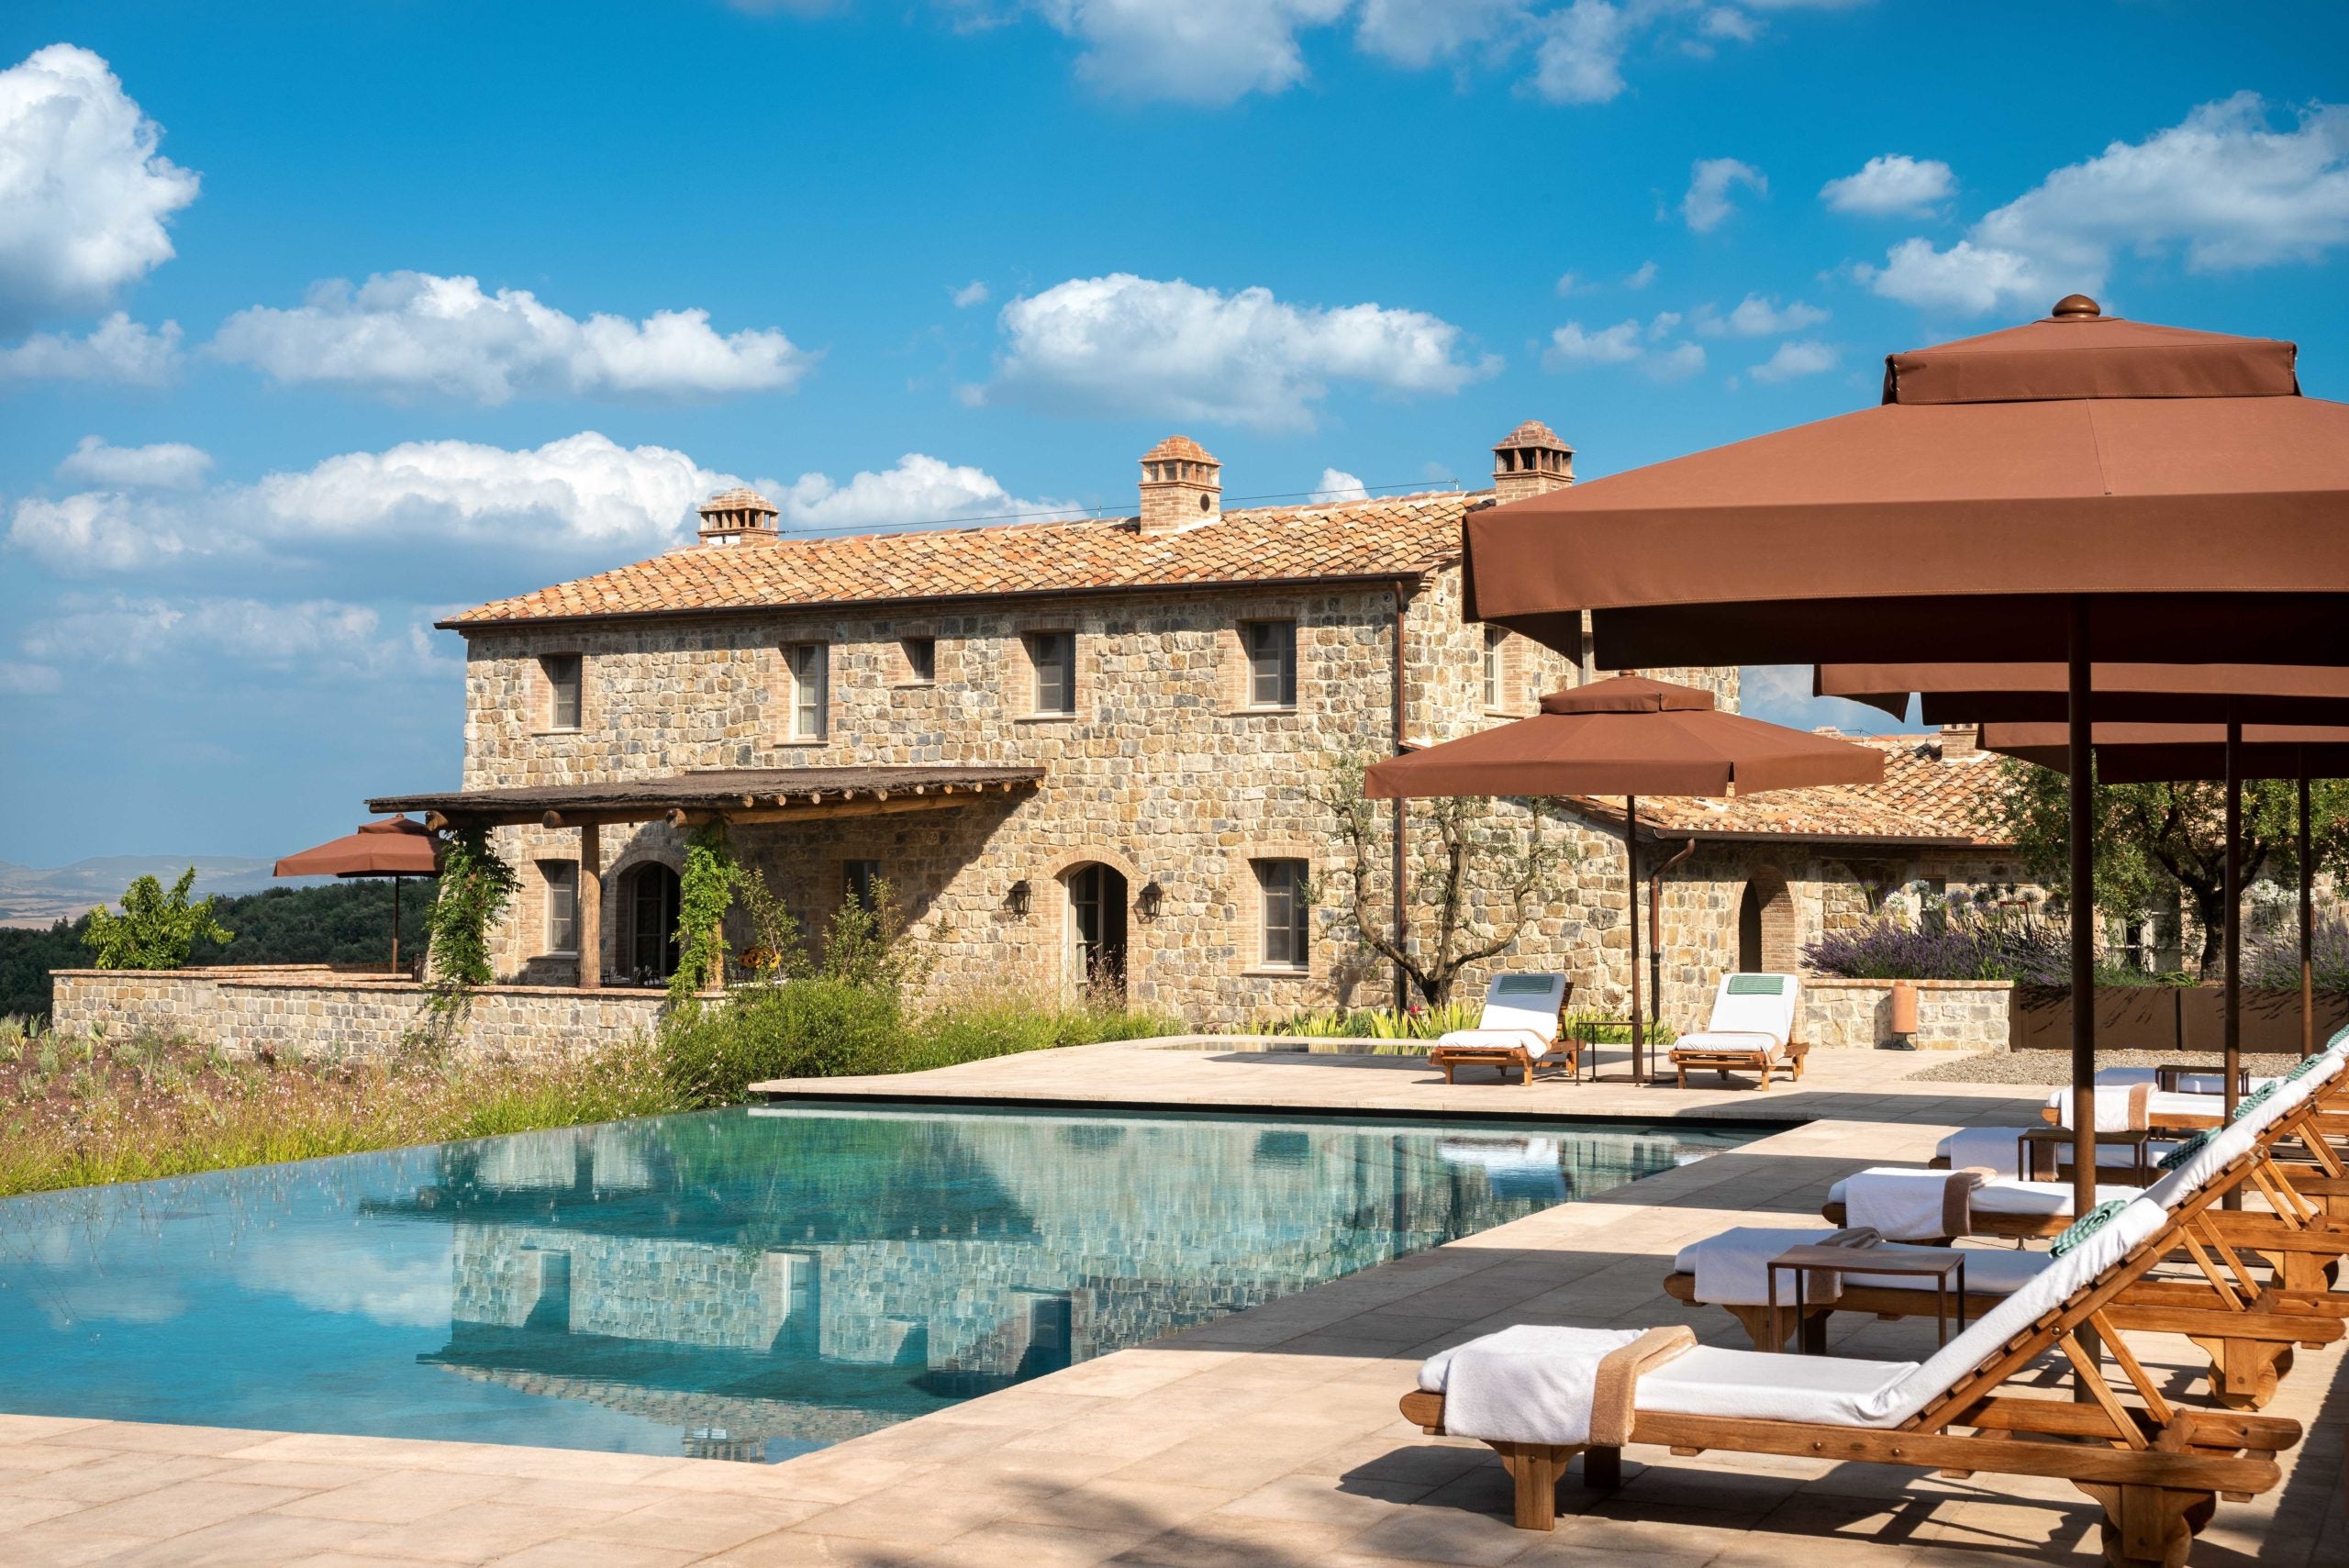 Spa of the Week: The Spa at Rosewood Castiglion del Bosco